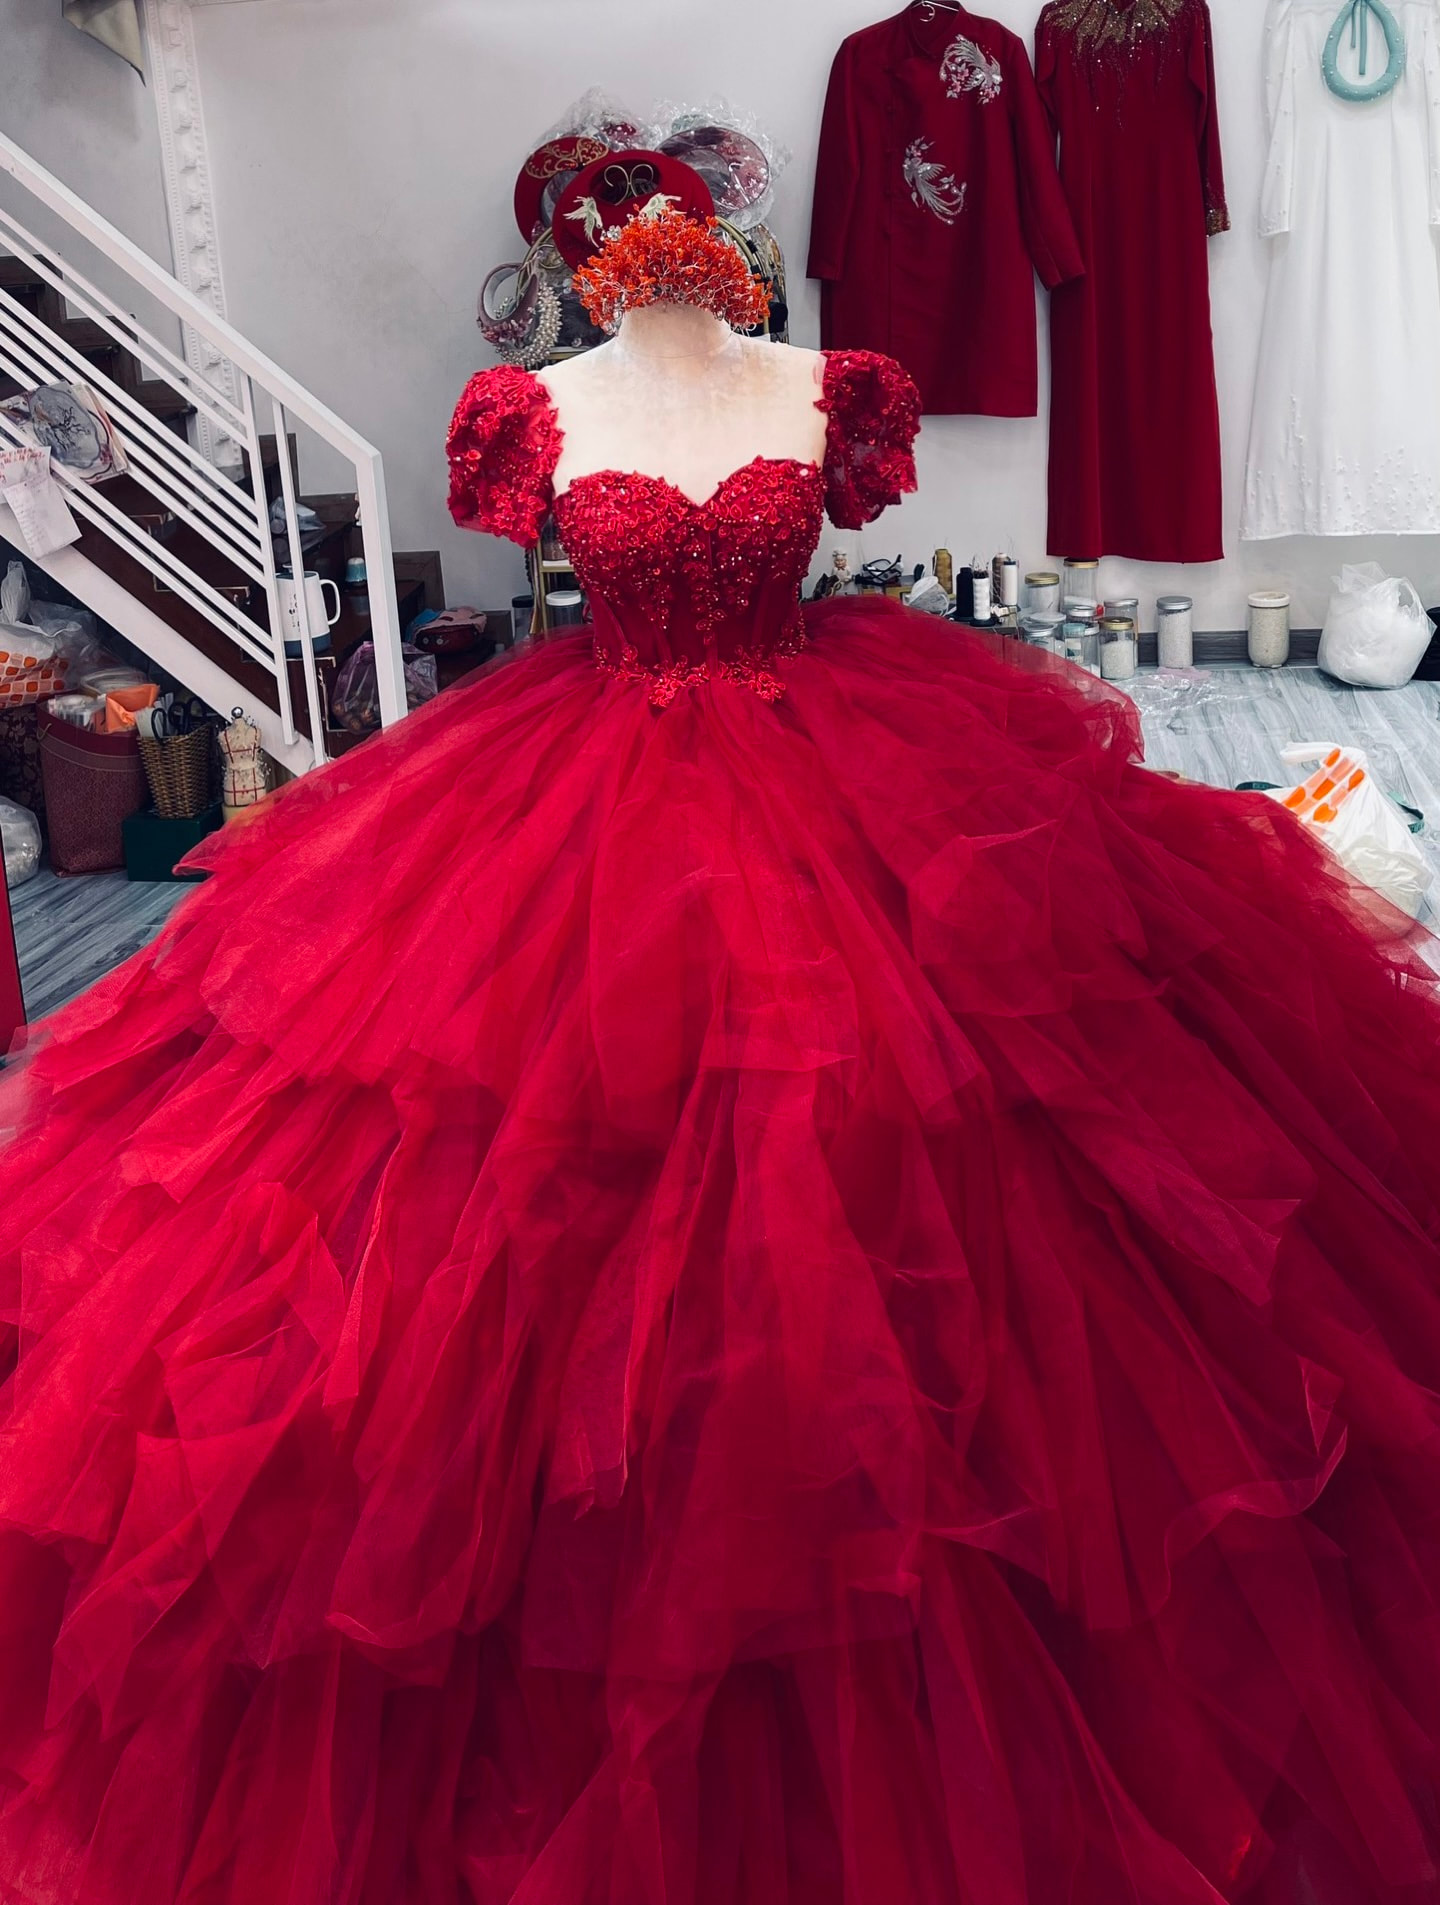 Extra Puffy Red Tulle Prom Dresses Aso Ebi Style Puffy Shoulder Ruffles  Ball Gown Long Evening Dressing Gowns - Evening Dresses - AliExpress